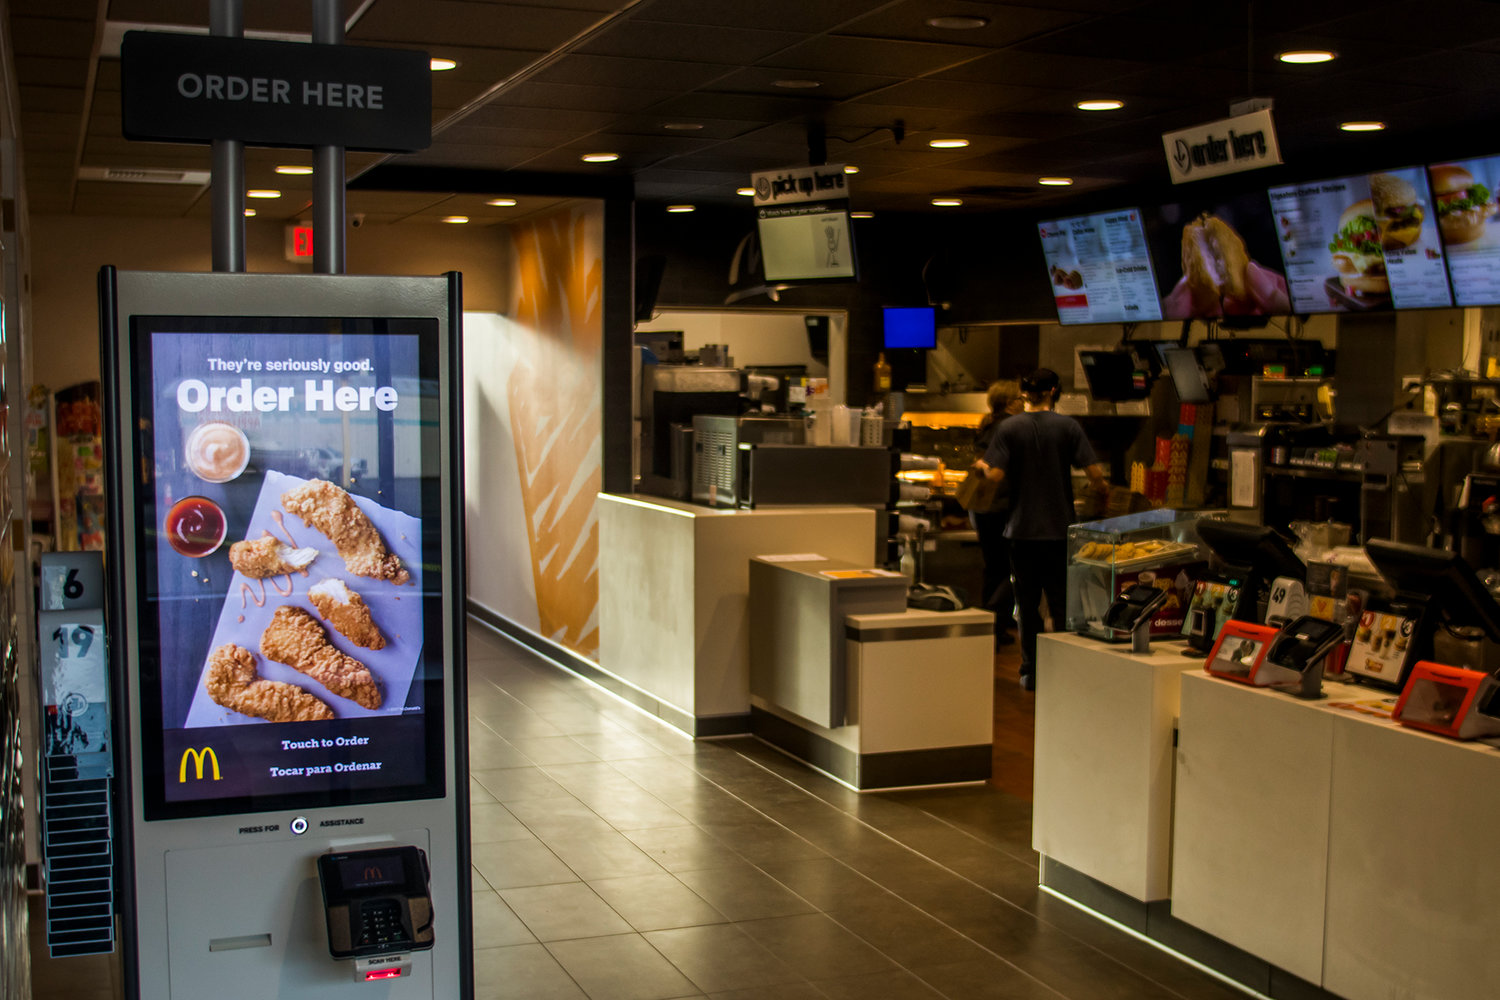 The new touch-screen kiosk is seen in the newly remodeled McDonald's Monday afternoon in Chehalis.